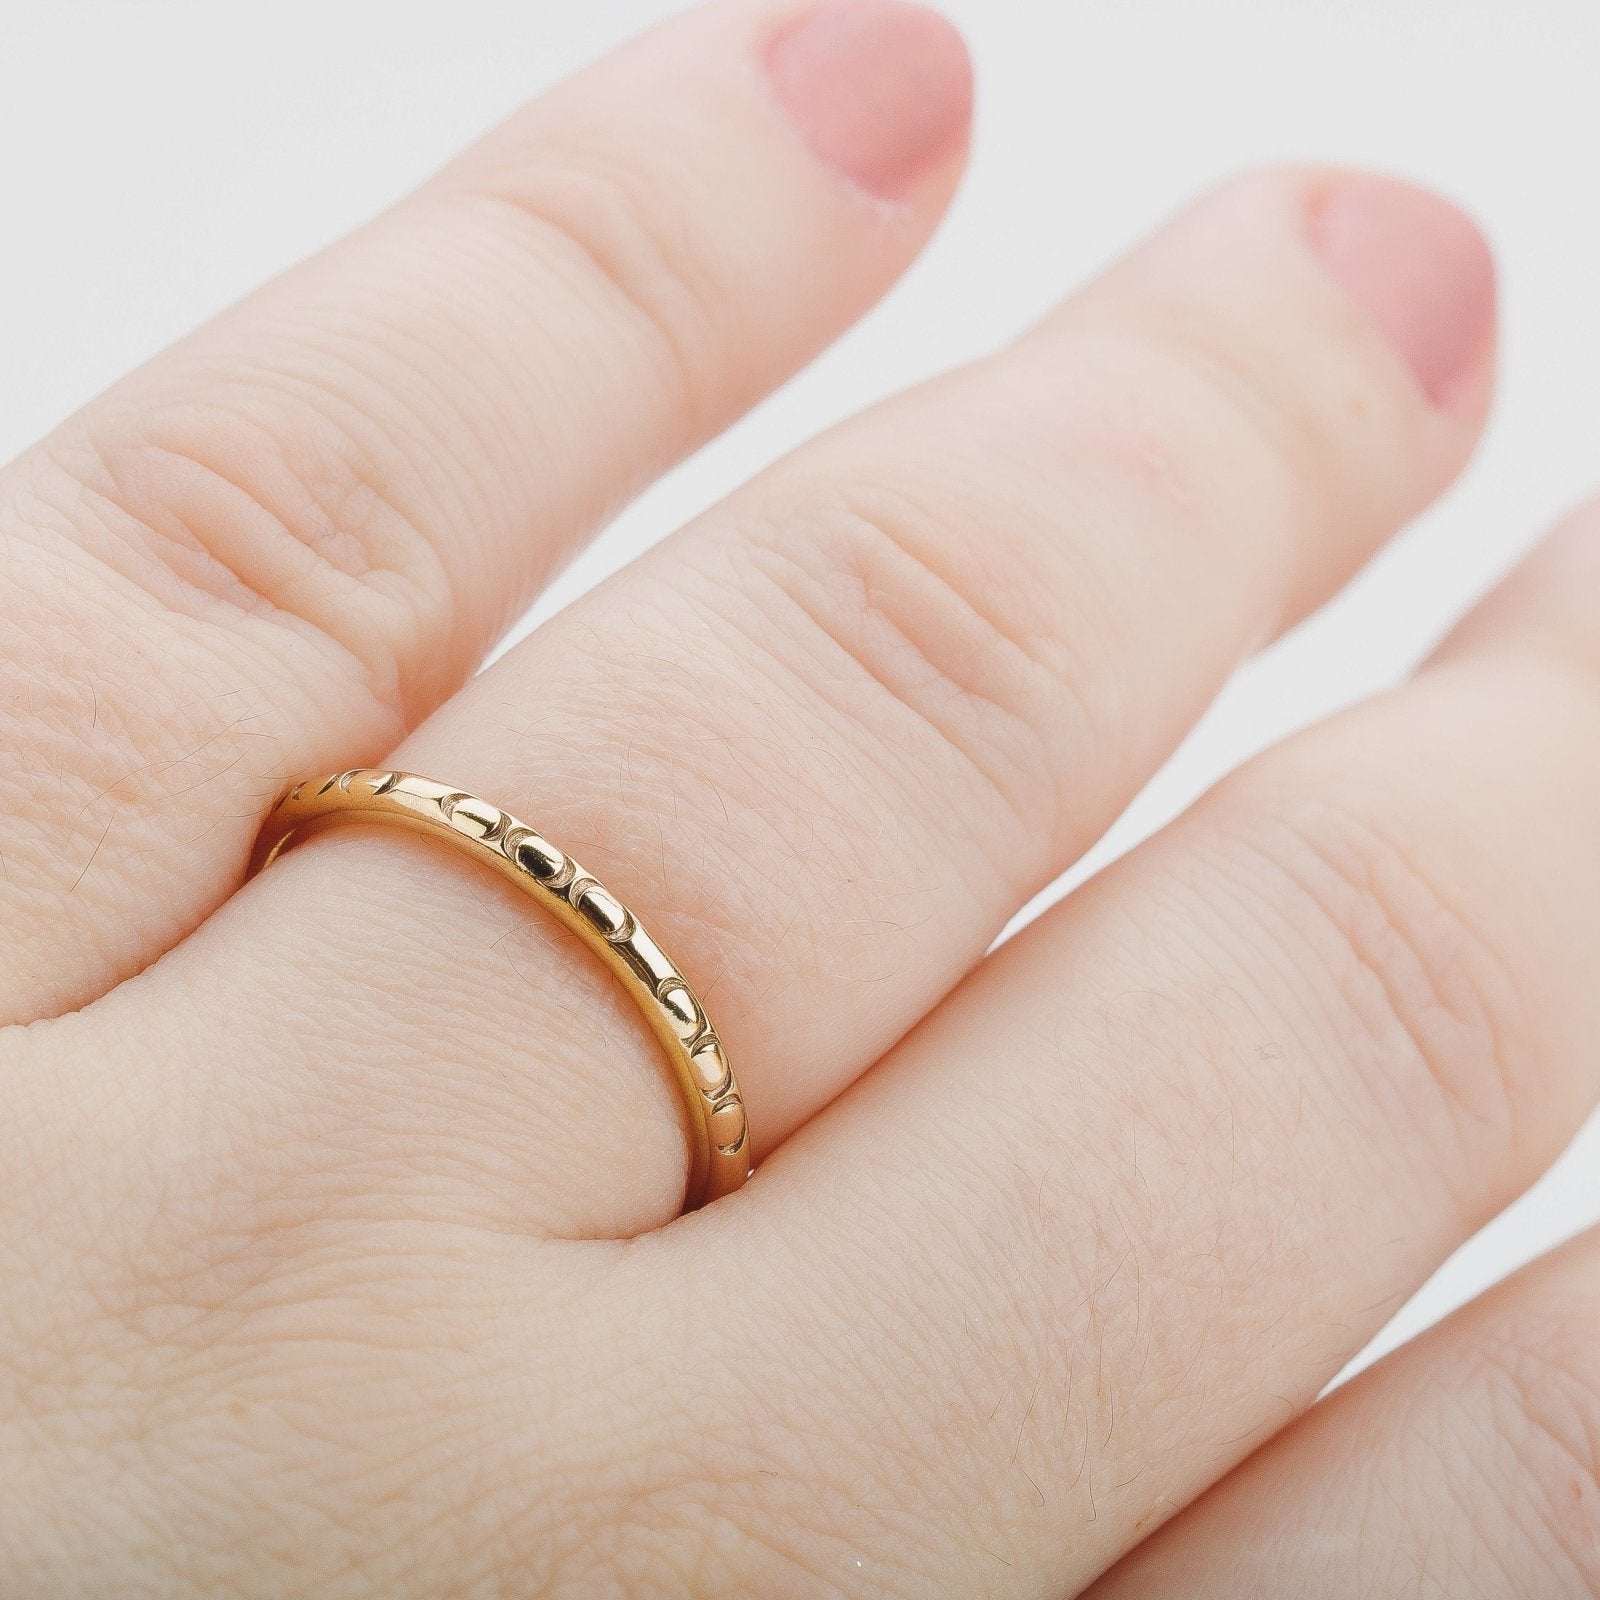 The Circlet Ring - Melanie Golden Jewelry - _badge_NEW, everyday, everyday essentials, New, rings, stacking rings, symbolic